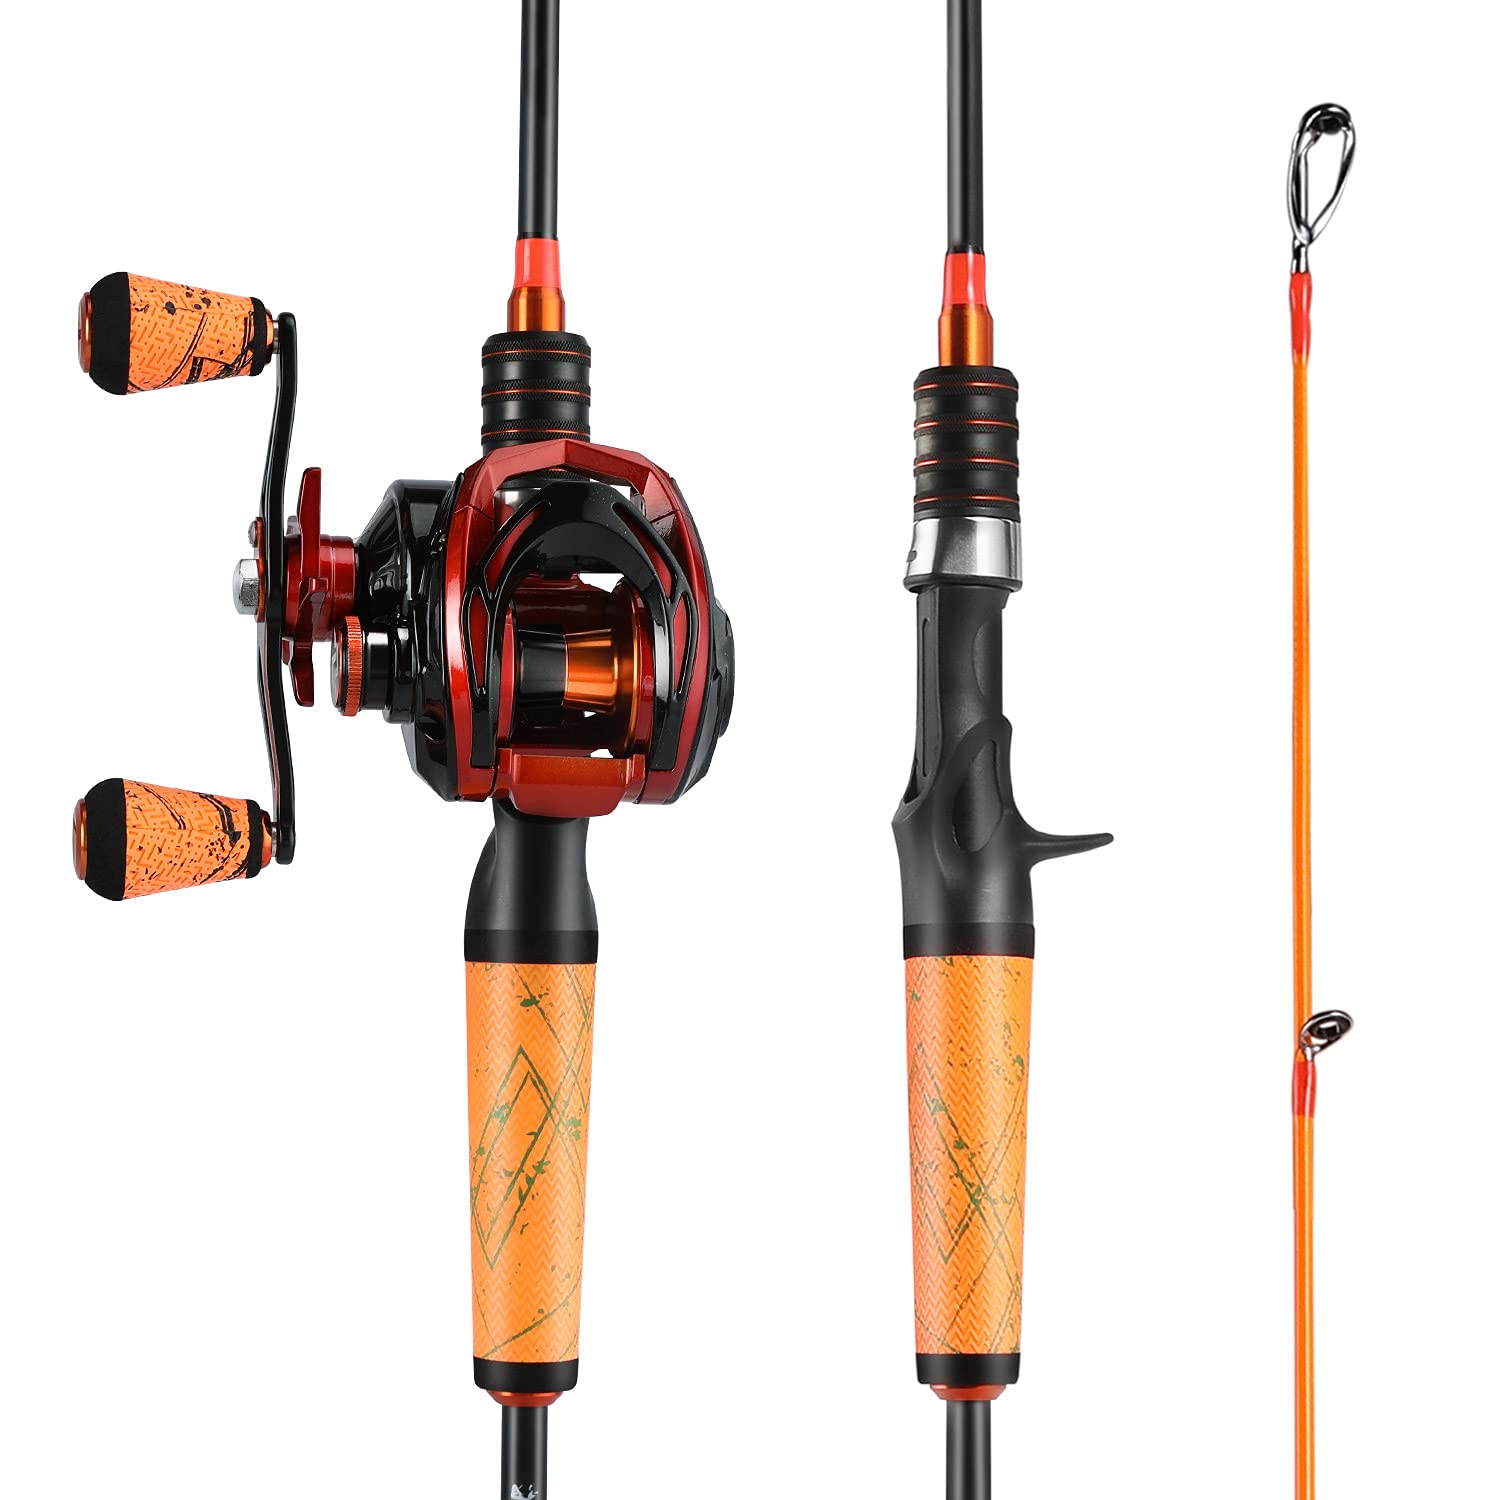 Oystern KidAs Fishing Pole Kit with Spinning Reel - 62 Piece Tackle